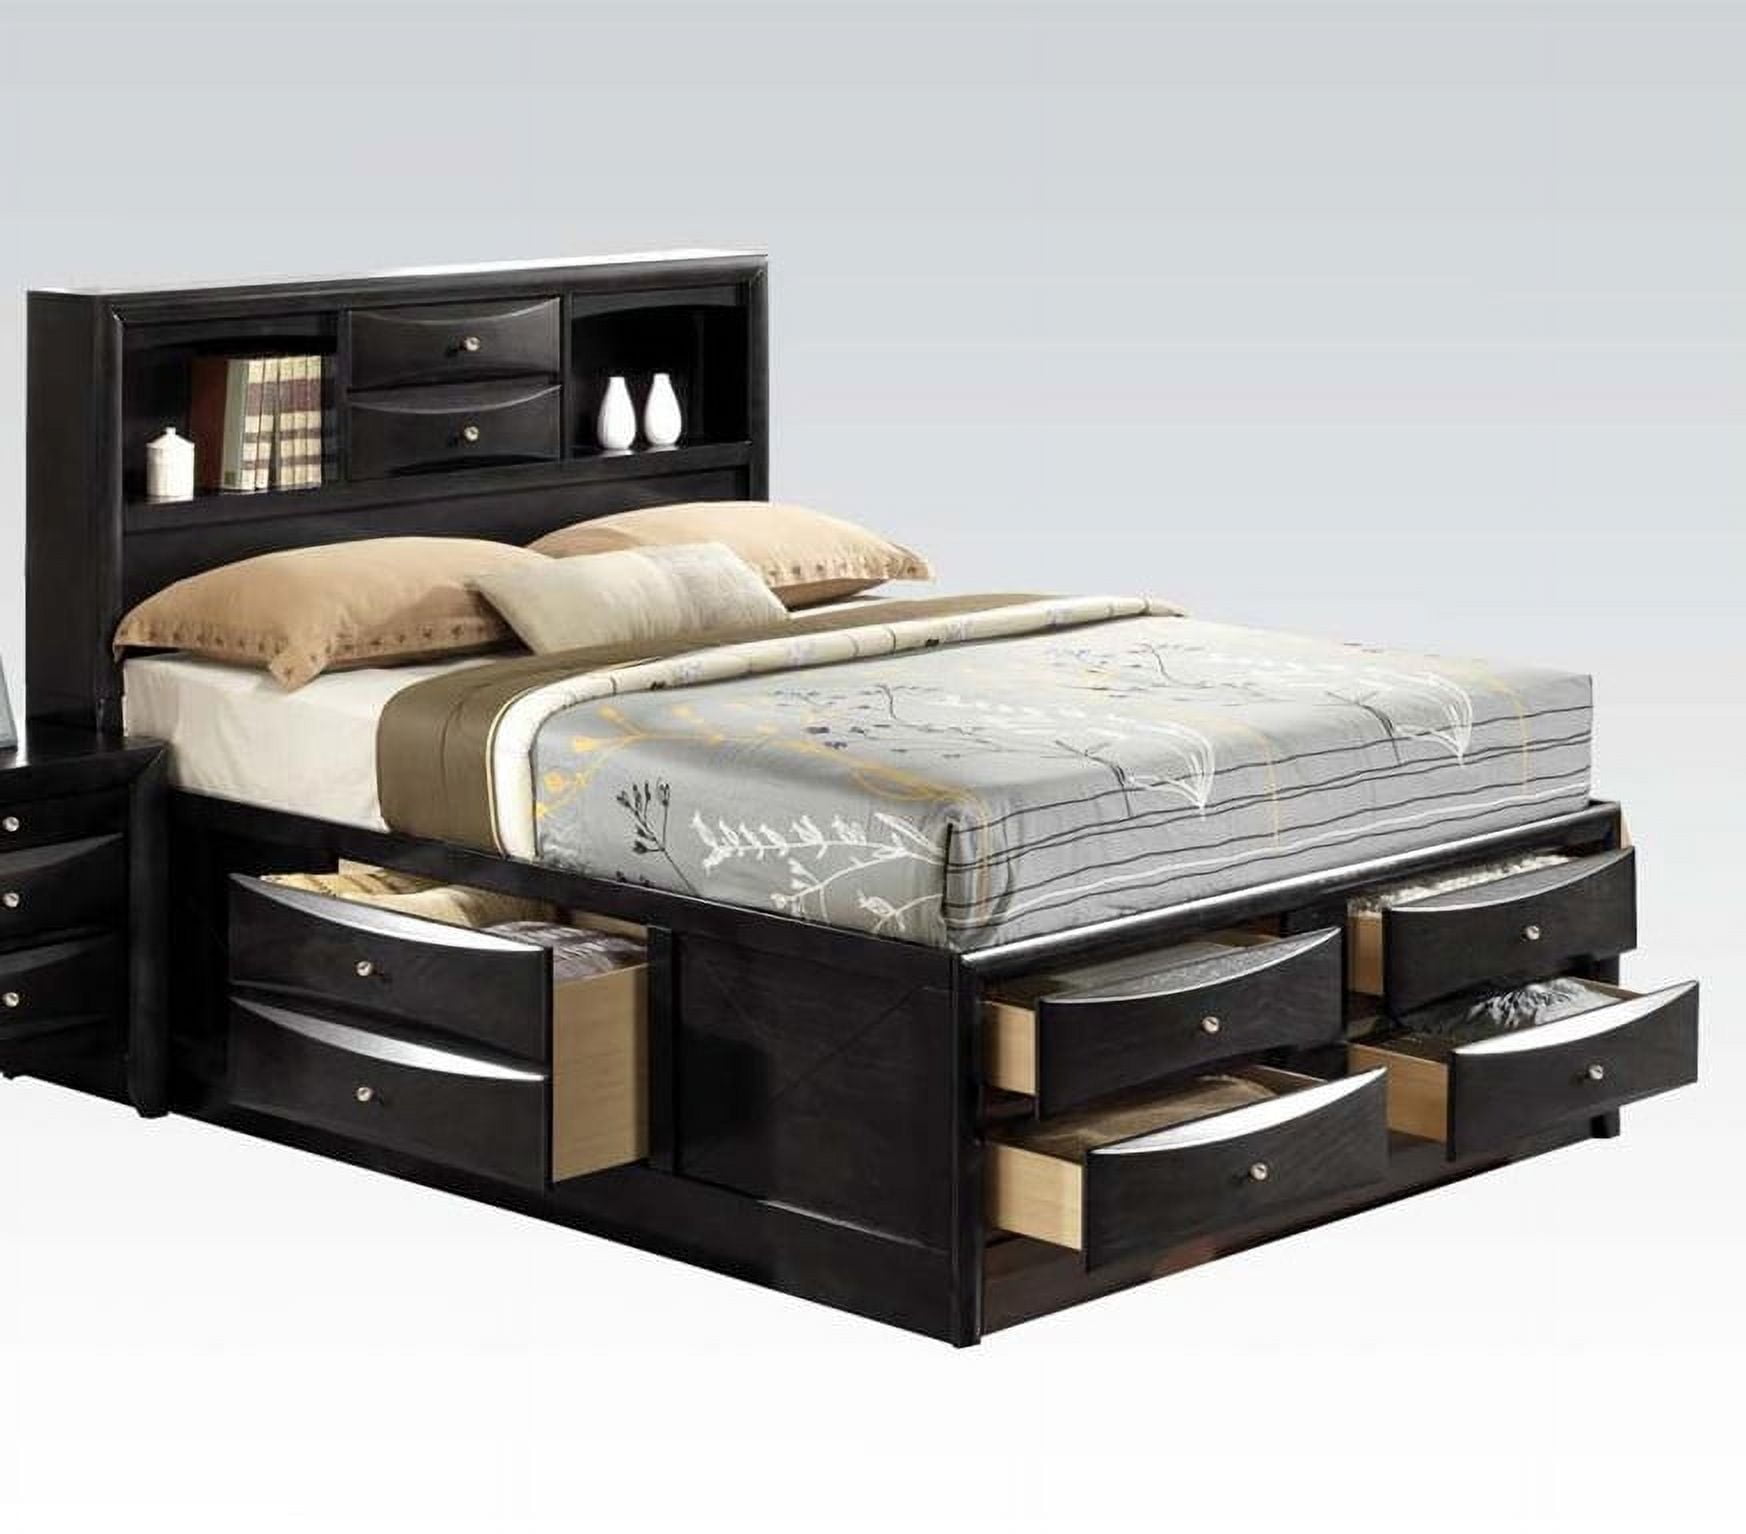 Picture of ACME Furniture 21606EK KIT 91 x 79 x 56 in. Ireland Eastern Bed with Storage, Black - King Size